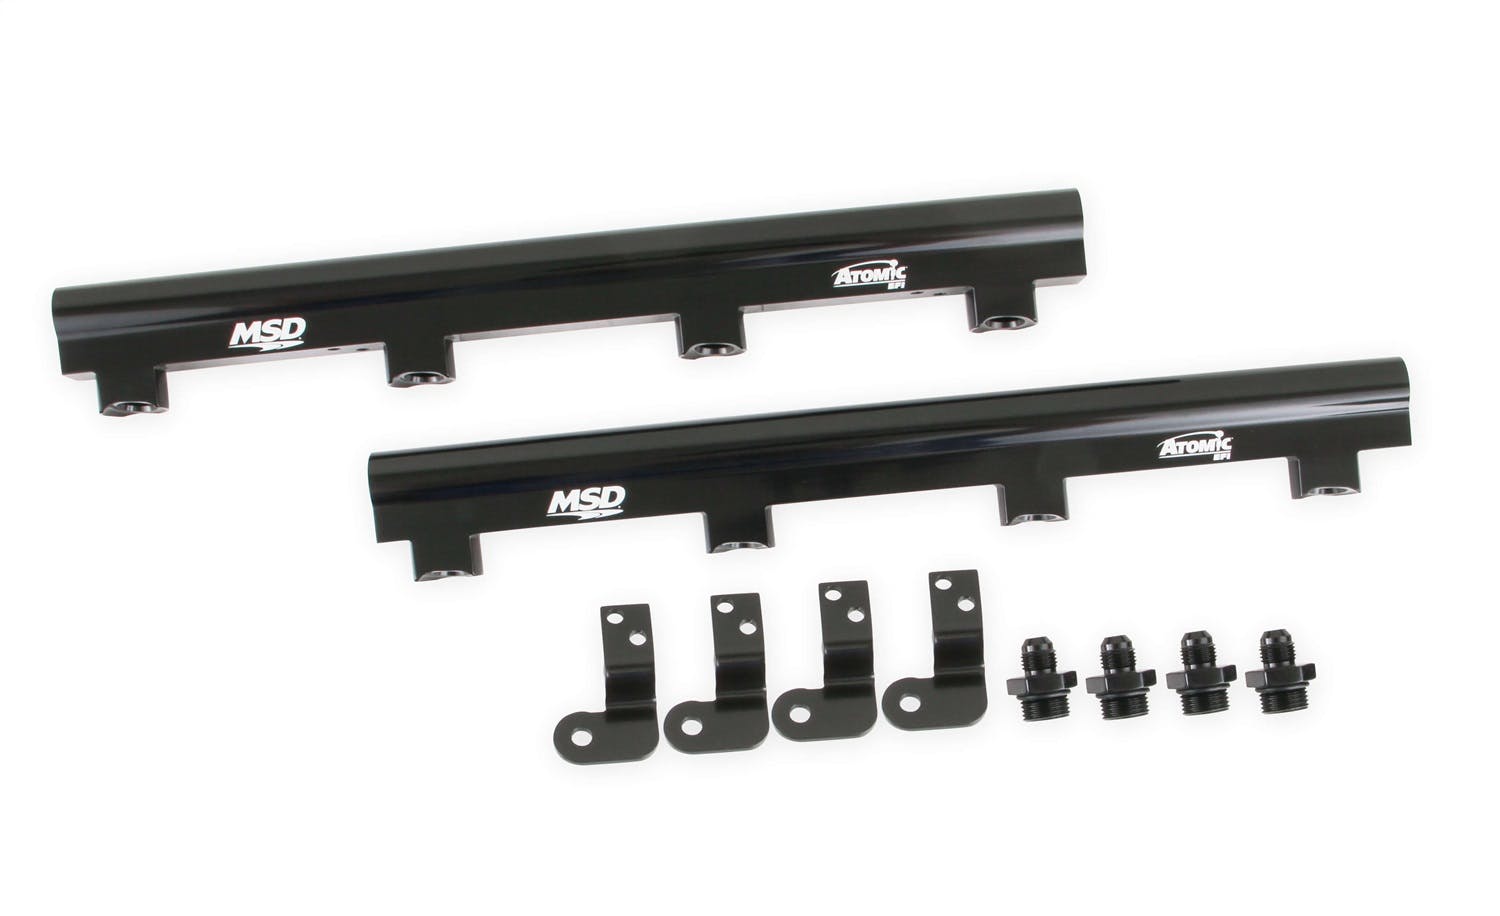 MSD Performance 2722 Fuel Rails for LS7 Airforce Manifold